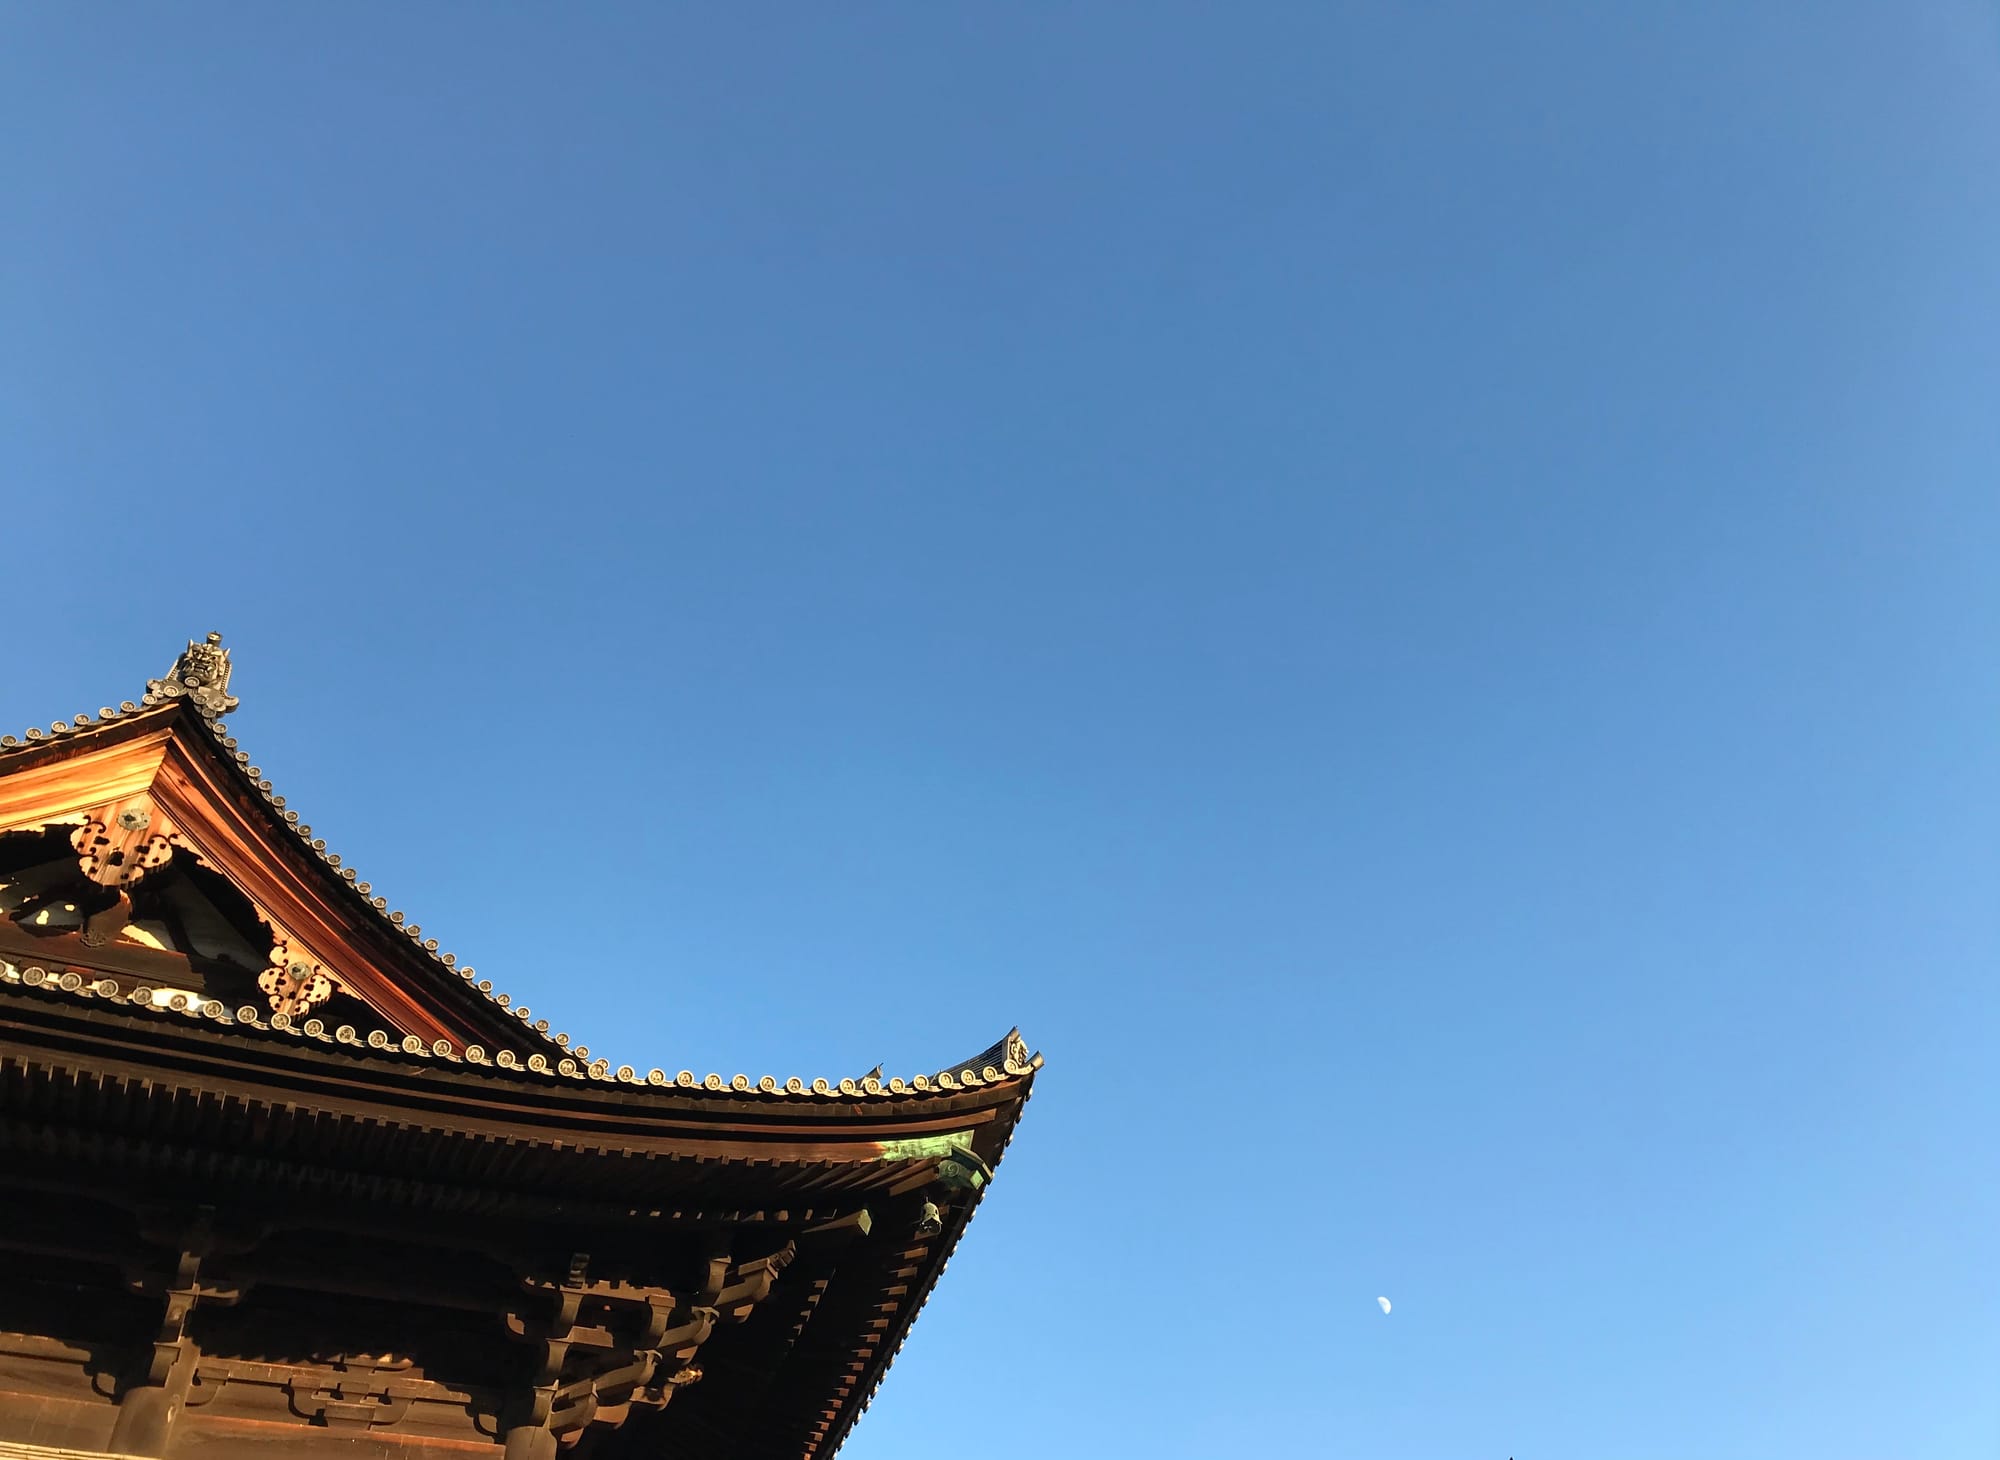 On the left, a frontal view of the roof of Tofuku-ji temple. To the right, the moon emerging in the blue late-afternoon sky. 